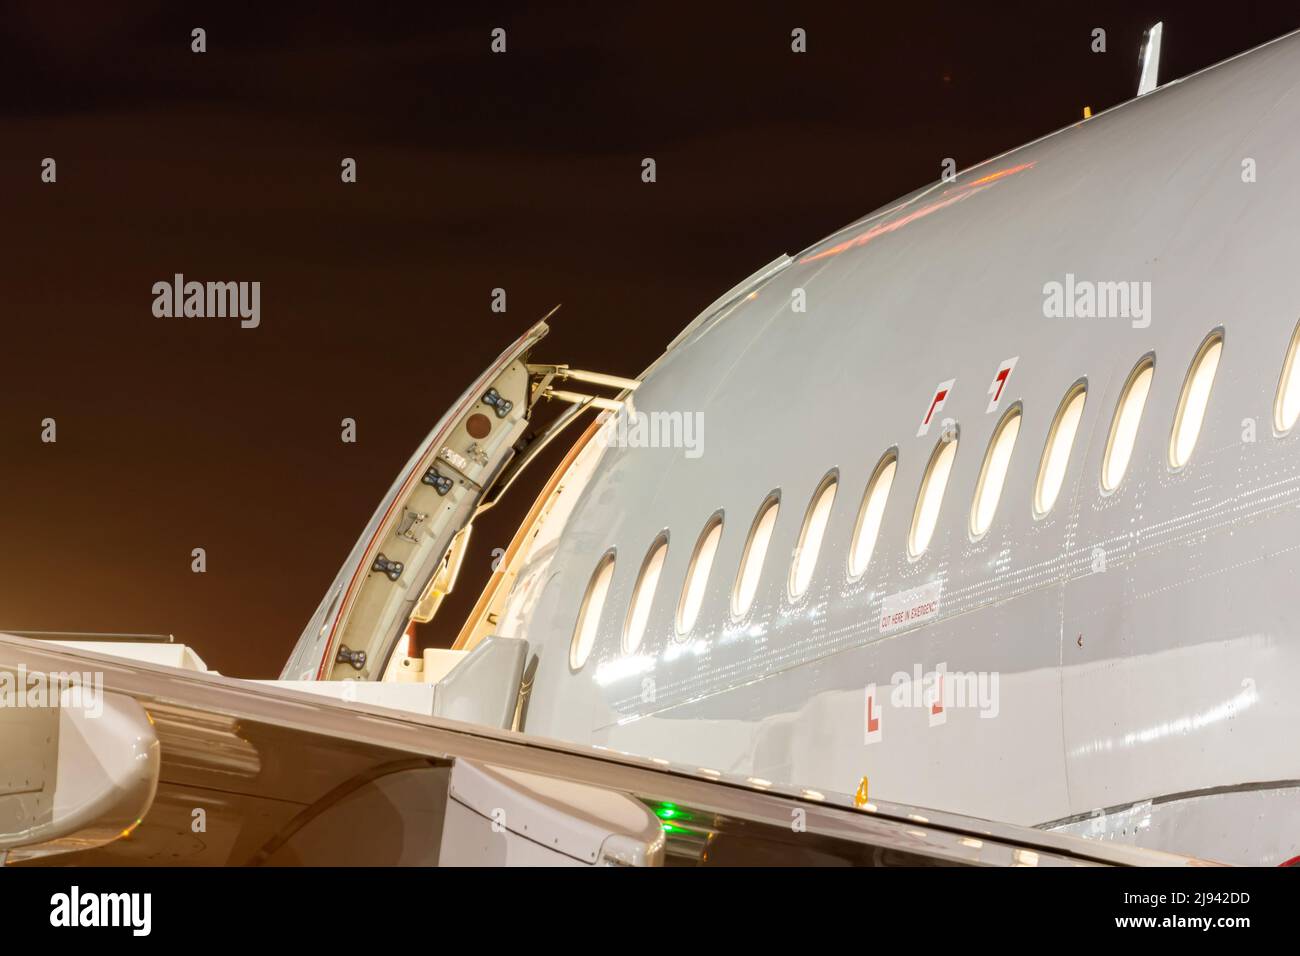 Airplane fuselage at night with open door and luminous portholes Stock Photo